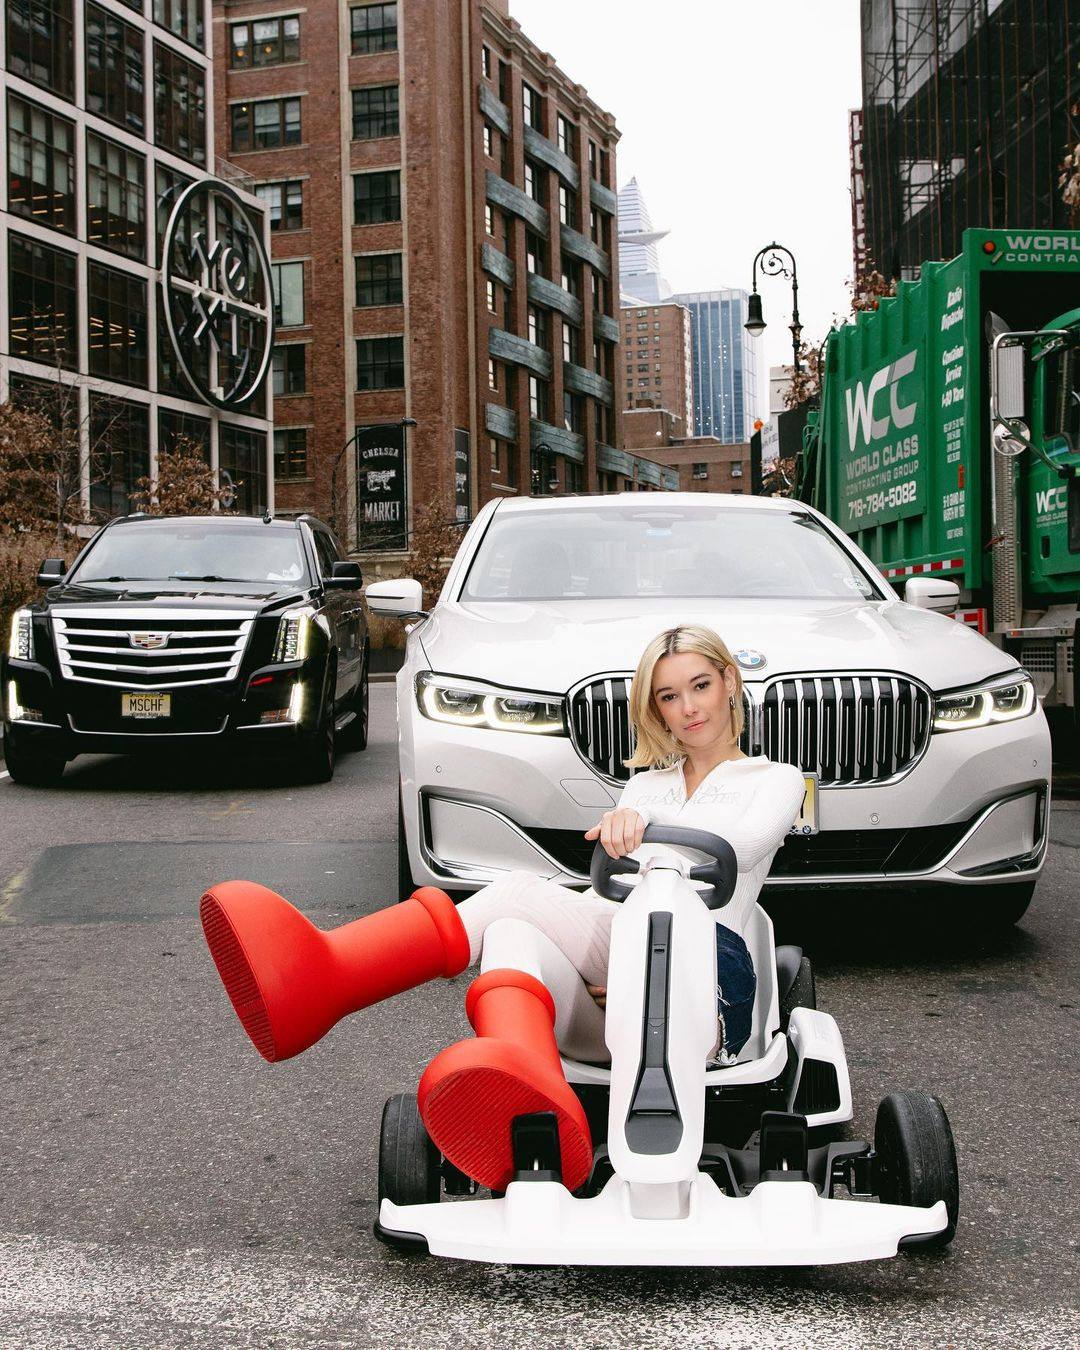 MSCHF's 6 most outrageous pieces ever: the Big Red Boots went viral, but  before that came Birkinstocks made from Hermès bags, worn by Kylie Jenner,  and Eat the Rich lollies with Mark